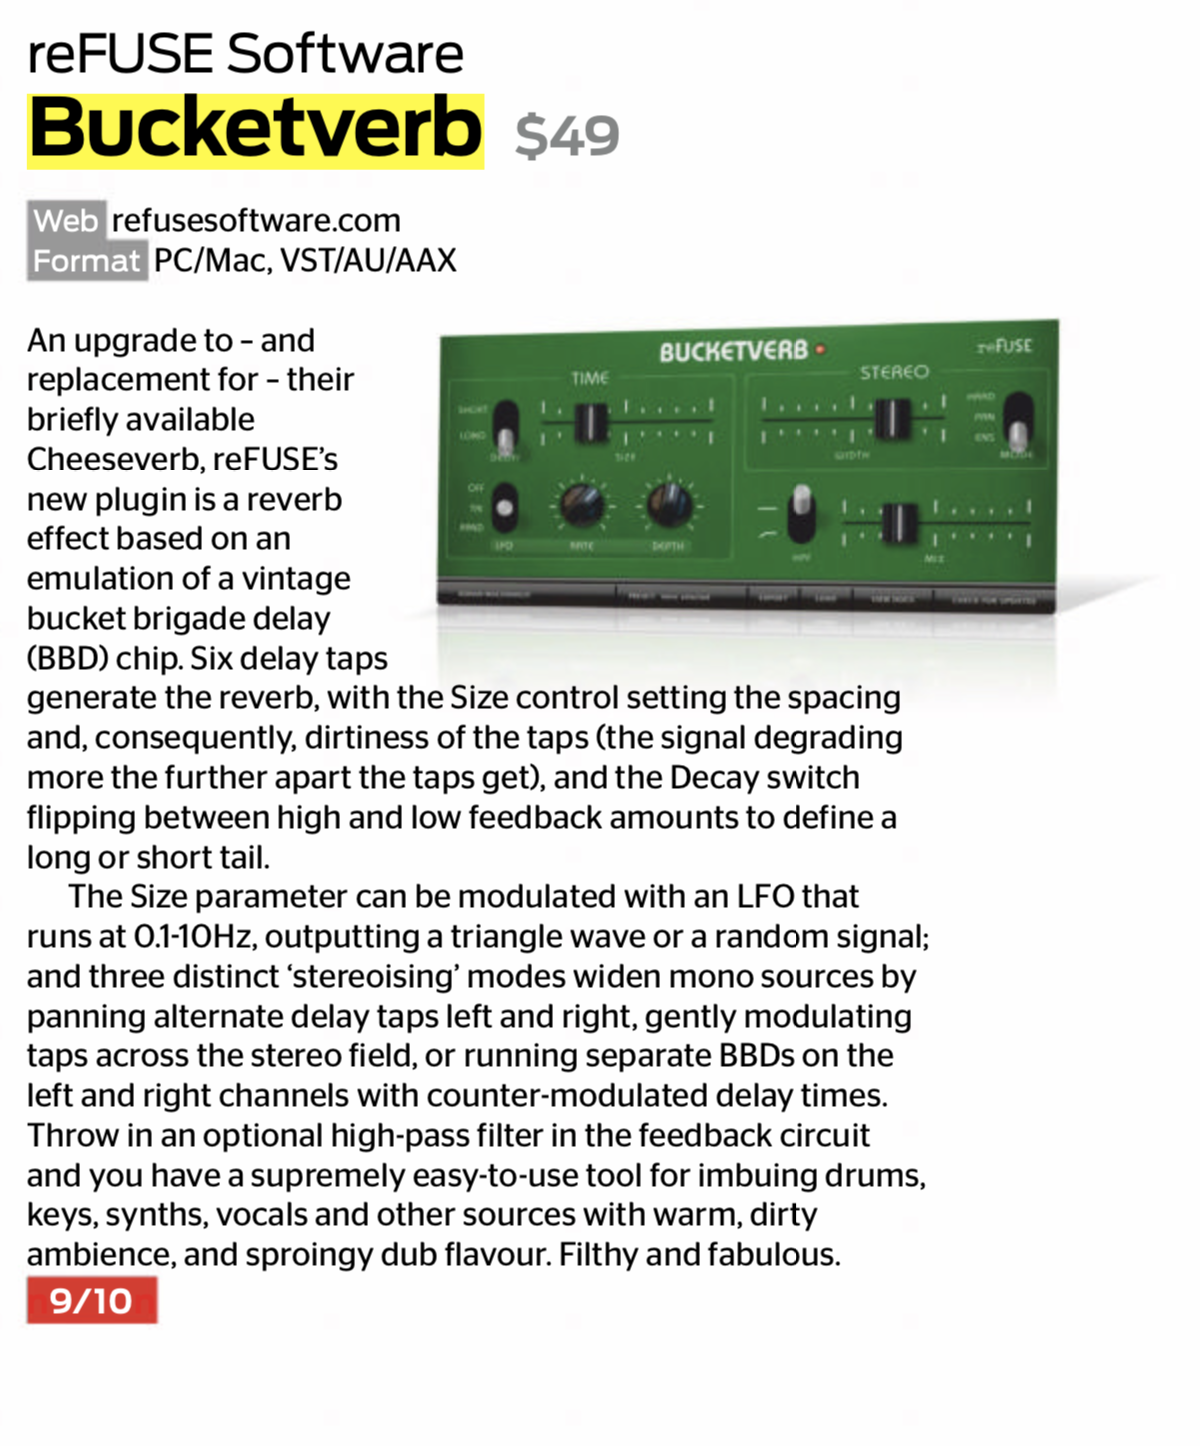 <p>An upgrade to – and replacement for – their briefly available Cheeseverb, reFUSE’s new plugin is a reverb effect based on an emulation of a vintage bucket brigade delay (BBD) chip. Six delay taps generate the reverb, with the Size control setting the spacing and, consequently, dirtiness of the taps (the signal degrading more the further apart the taps get), and the Decay switch flipping between high and low feedback amounts to define a long or short tail.</p>

<p>The Size parameter can be modulated with an LFO that runs at 0.1-10Hz, outputting a triangle wave or a random signal; and three distinct ‘stereoising’ modes widen mono sources by panning alternate delay taps left and right, gently modulating taps across the stereo field, or running separate BBDs on the left and right channels with counter-modulated delay times. Throw in an optional high-pass filter in the feedback circuit and you have a supremely easy-to-use tool for imbuing drums, keys, synths, vocals and other sources with warm, dirty ambience, and sproingy dub flavour. Filthy and fabulous. [9/10]</p>
